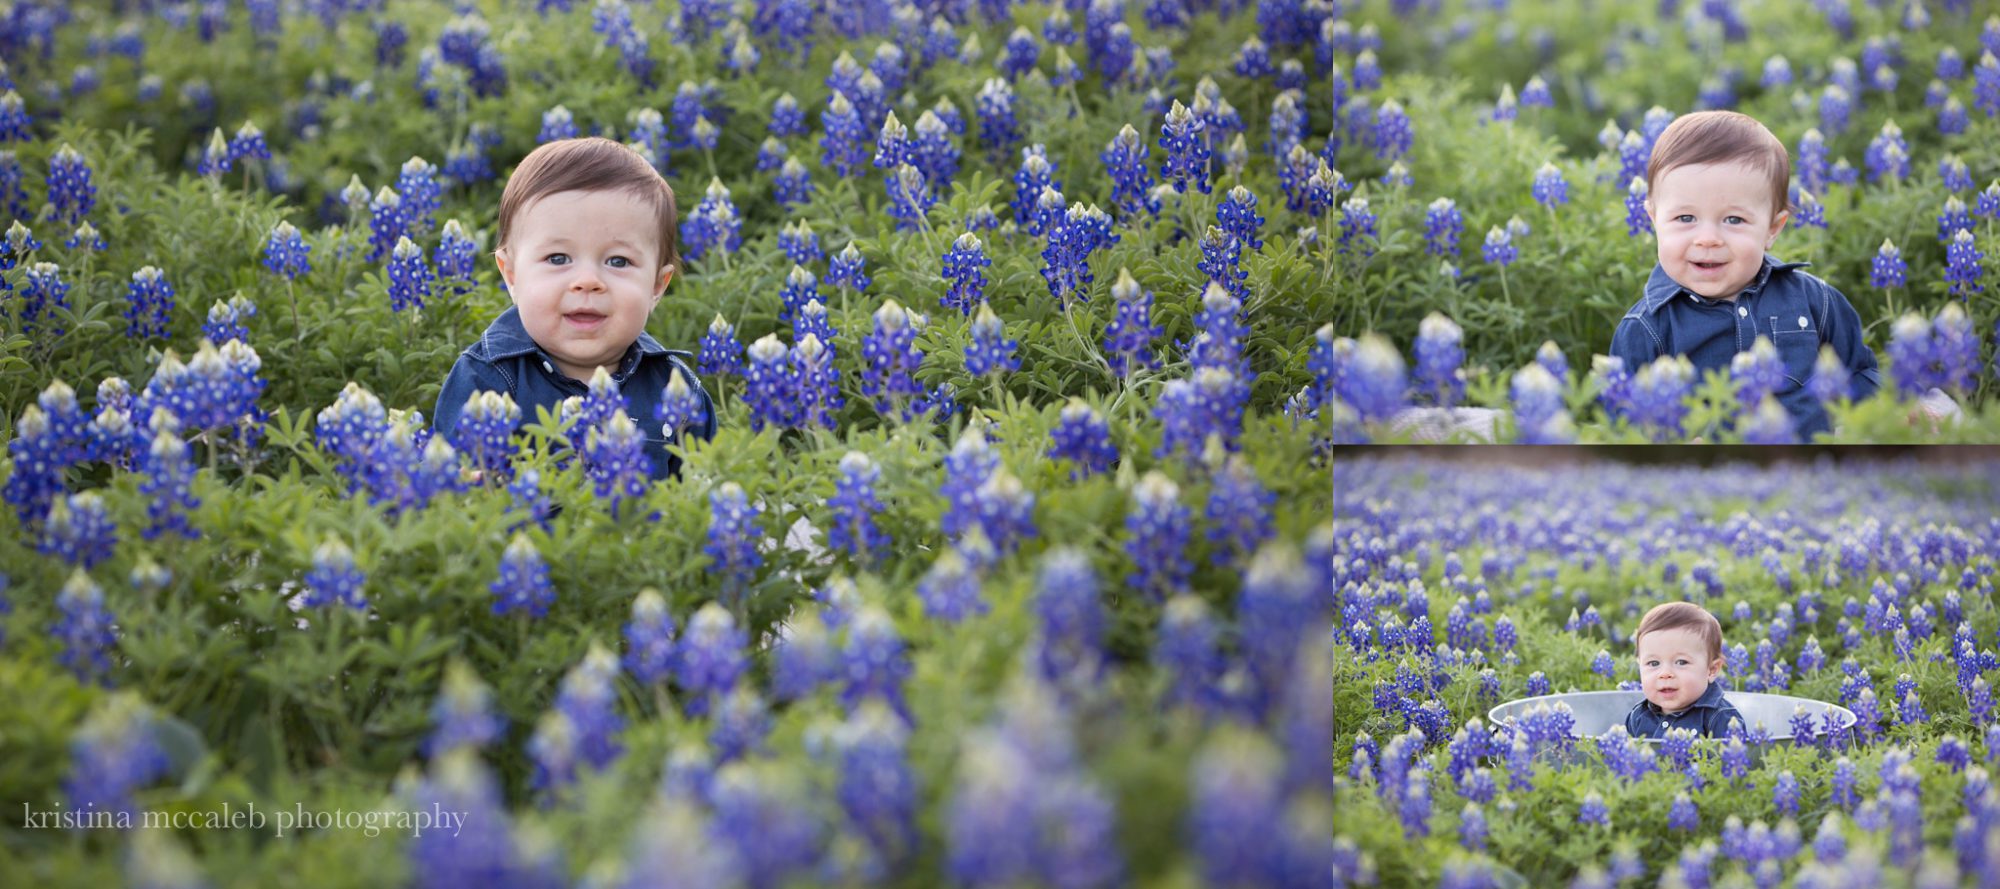 Why we love bluebonnets in Texas